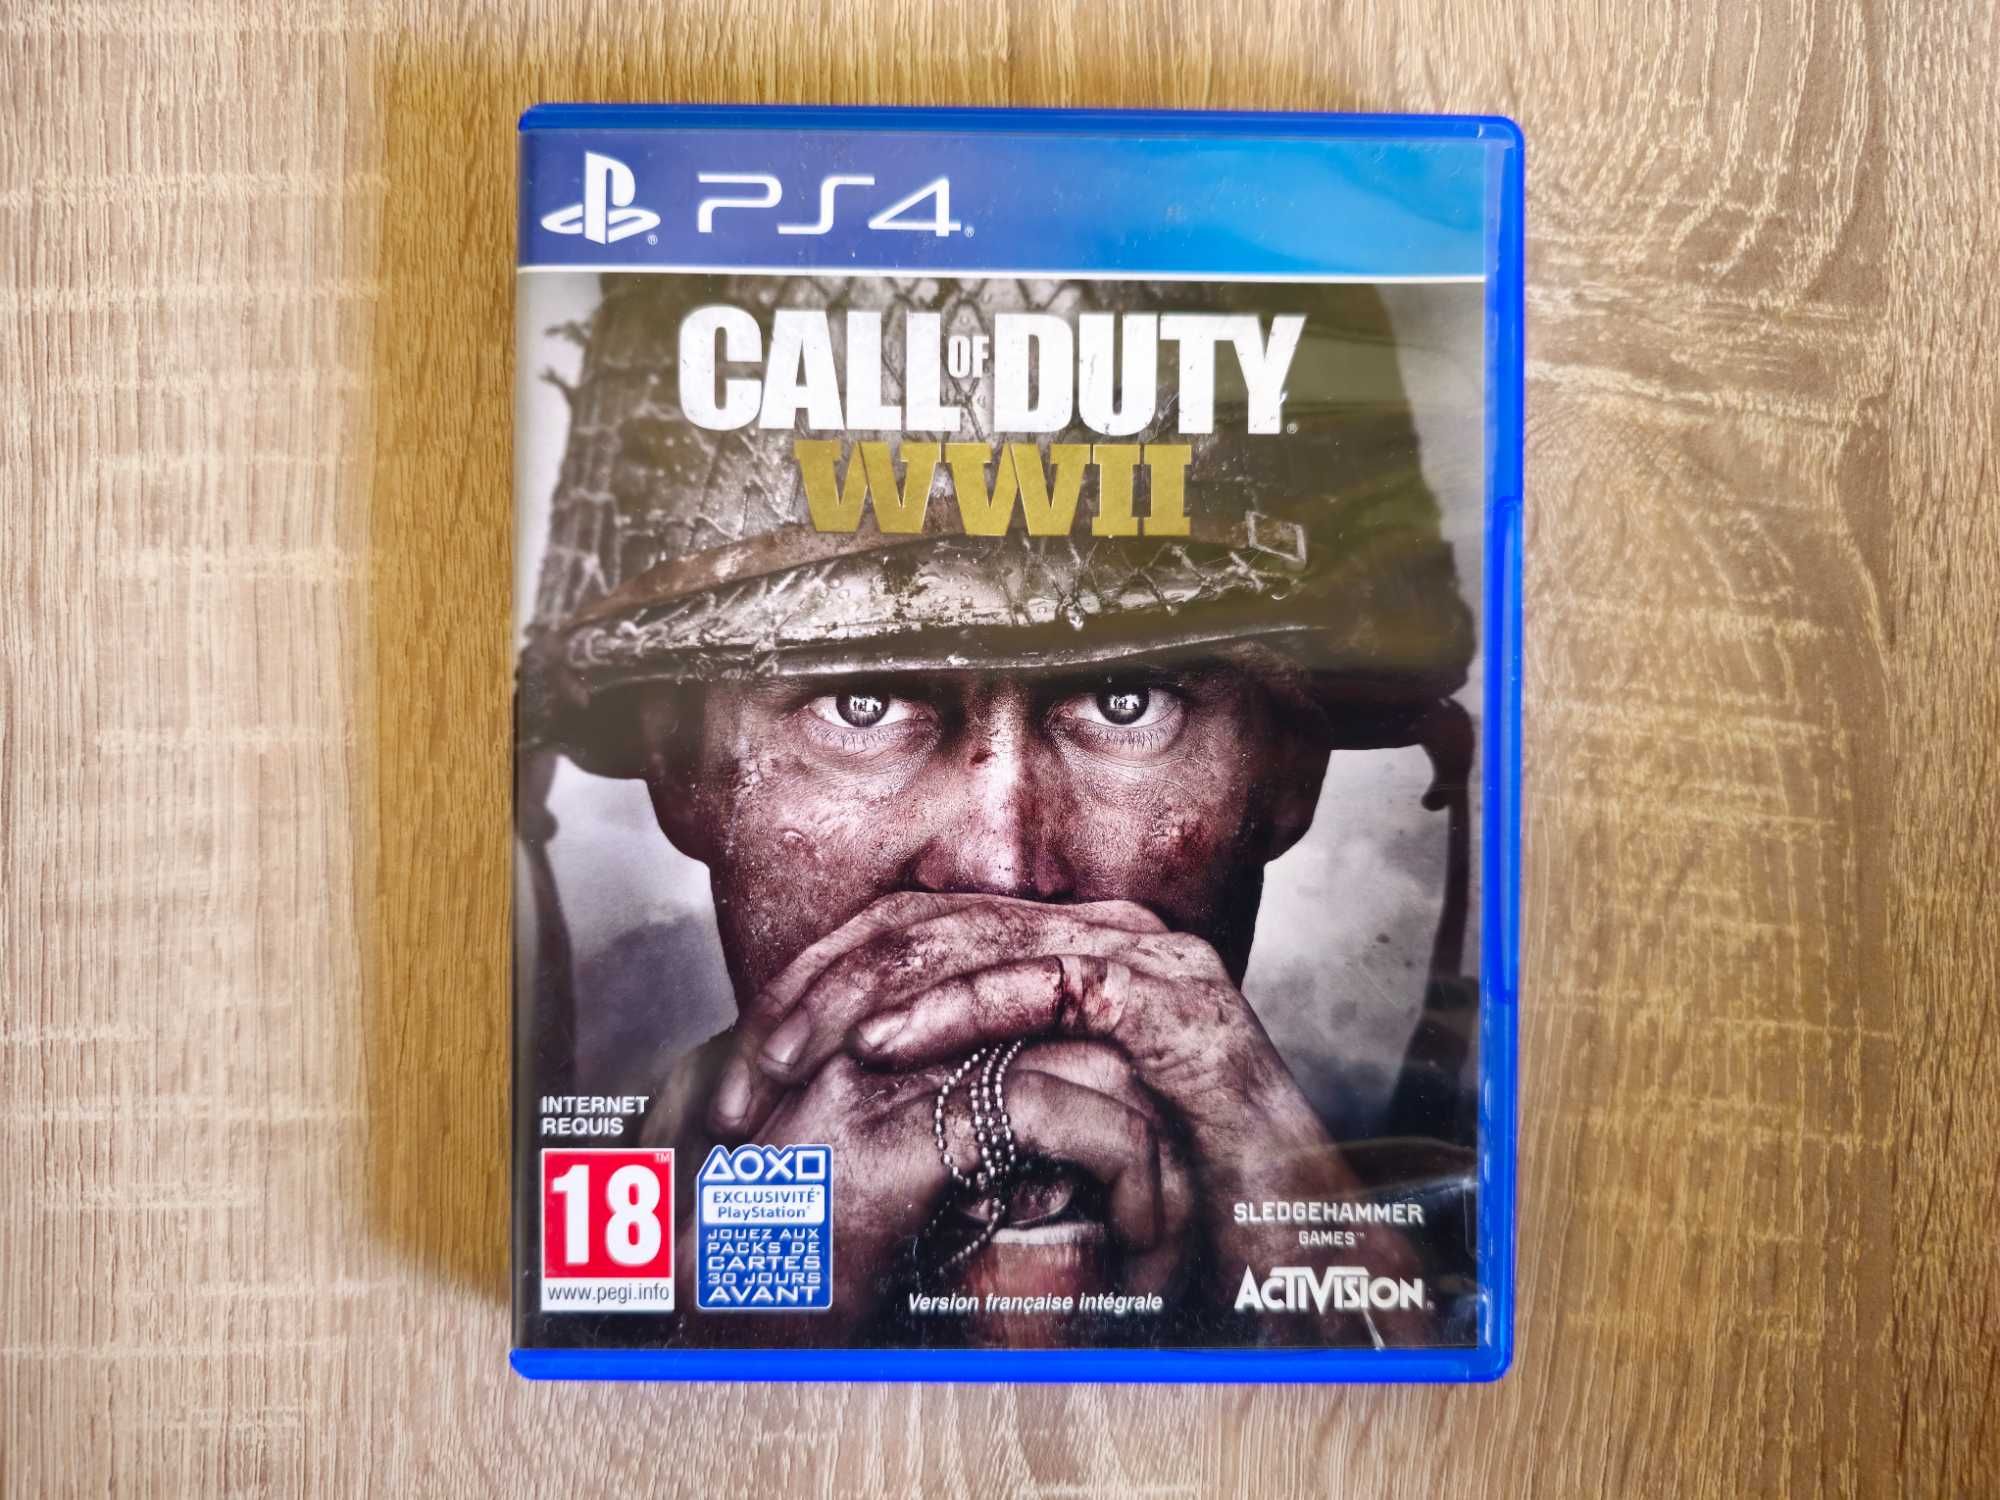 Call of Duty WWII / Call of Duty WW2 за PlayStation 4 PS4 ПС4